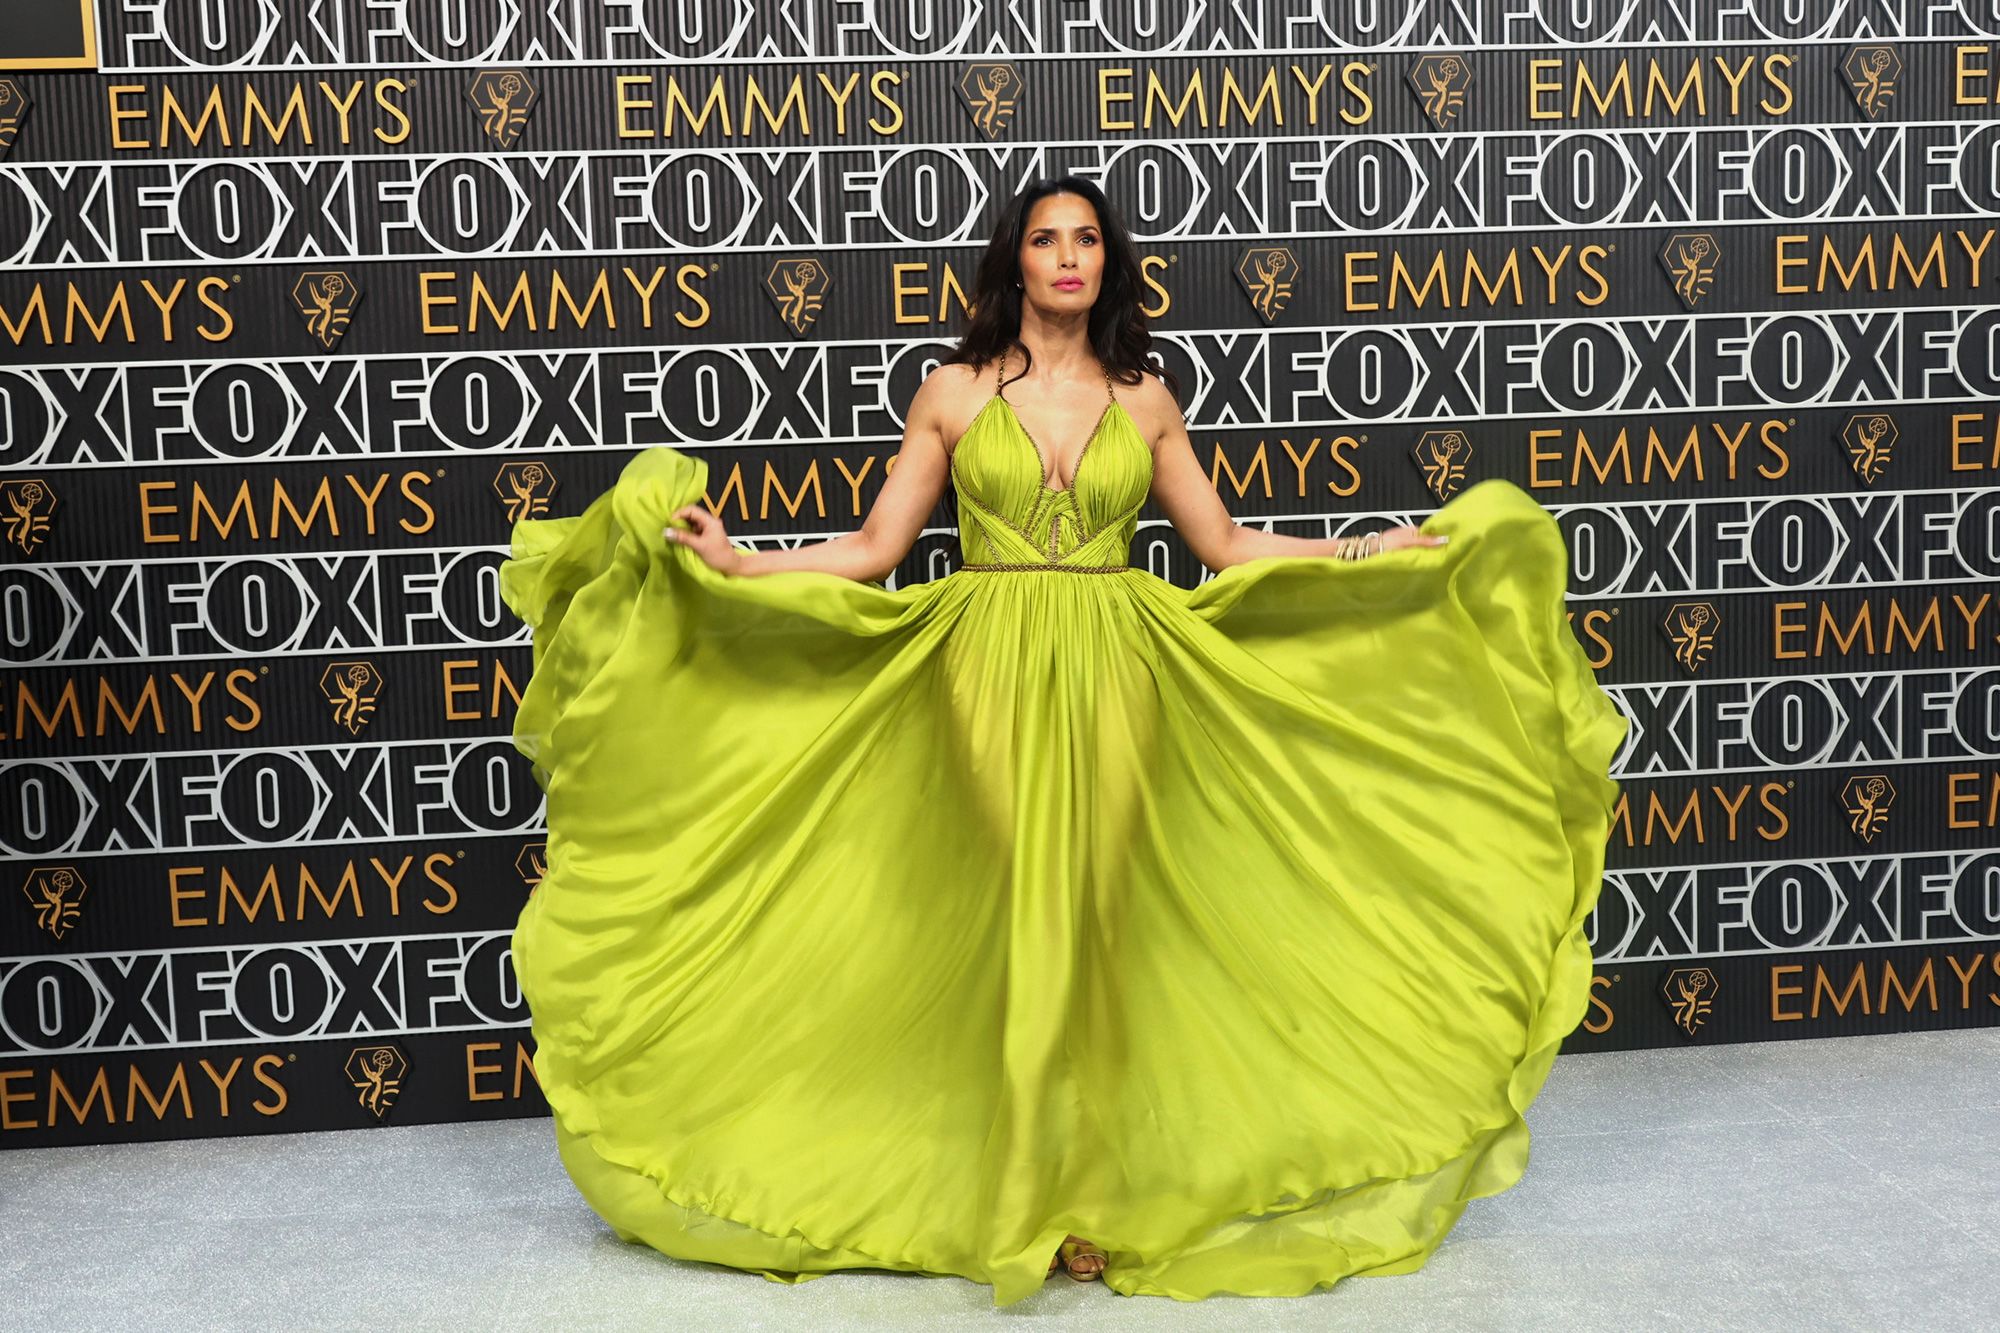 Television host Padma Lakshmi arrives in a neon green goddess gown with gold bodice trimming by New York label Marchesa.